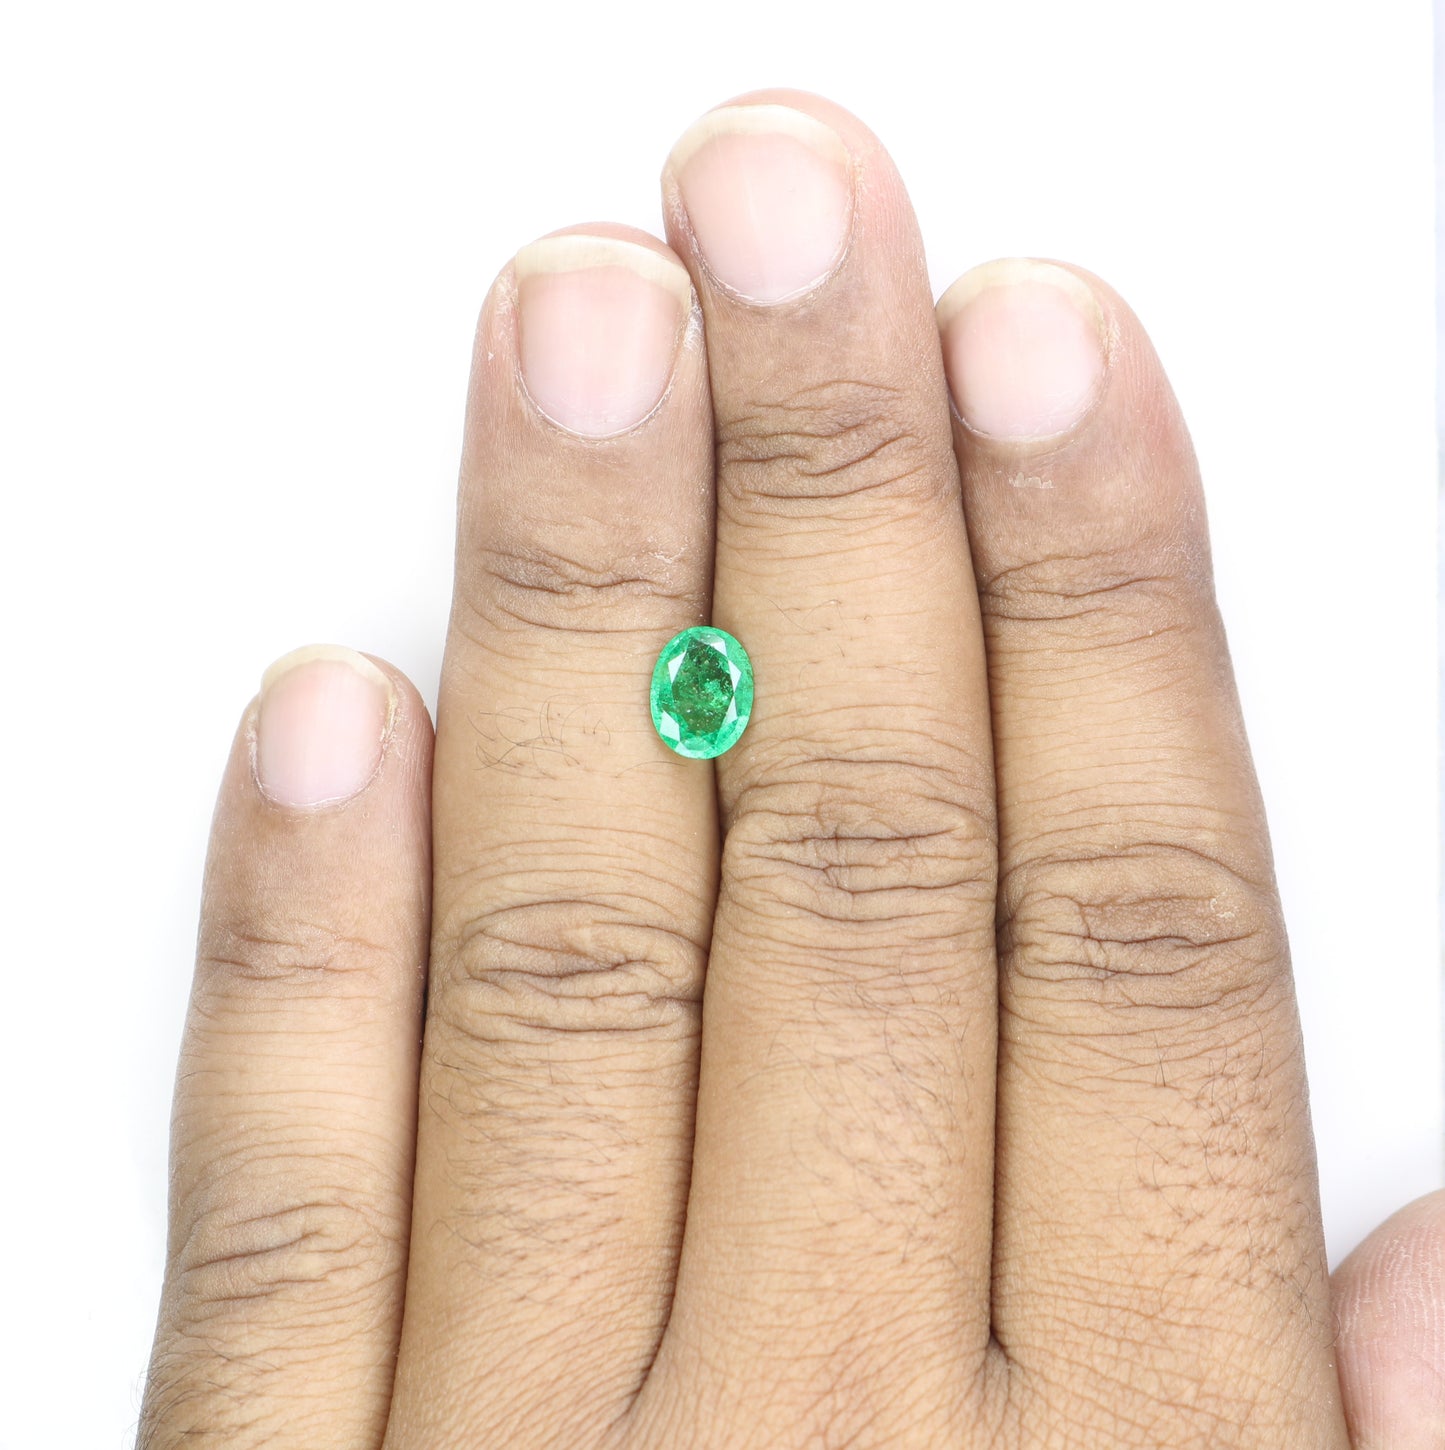 1.31 CT Green Emerald Sapphire Oval Cut Gemstone For Promise Ring